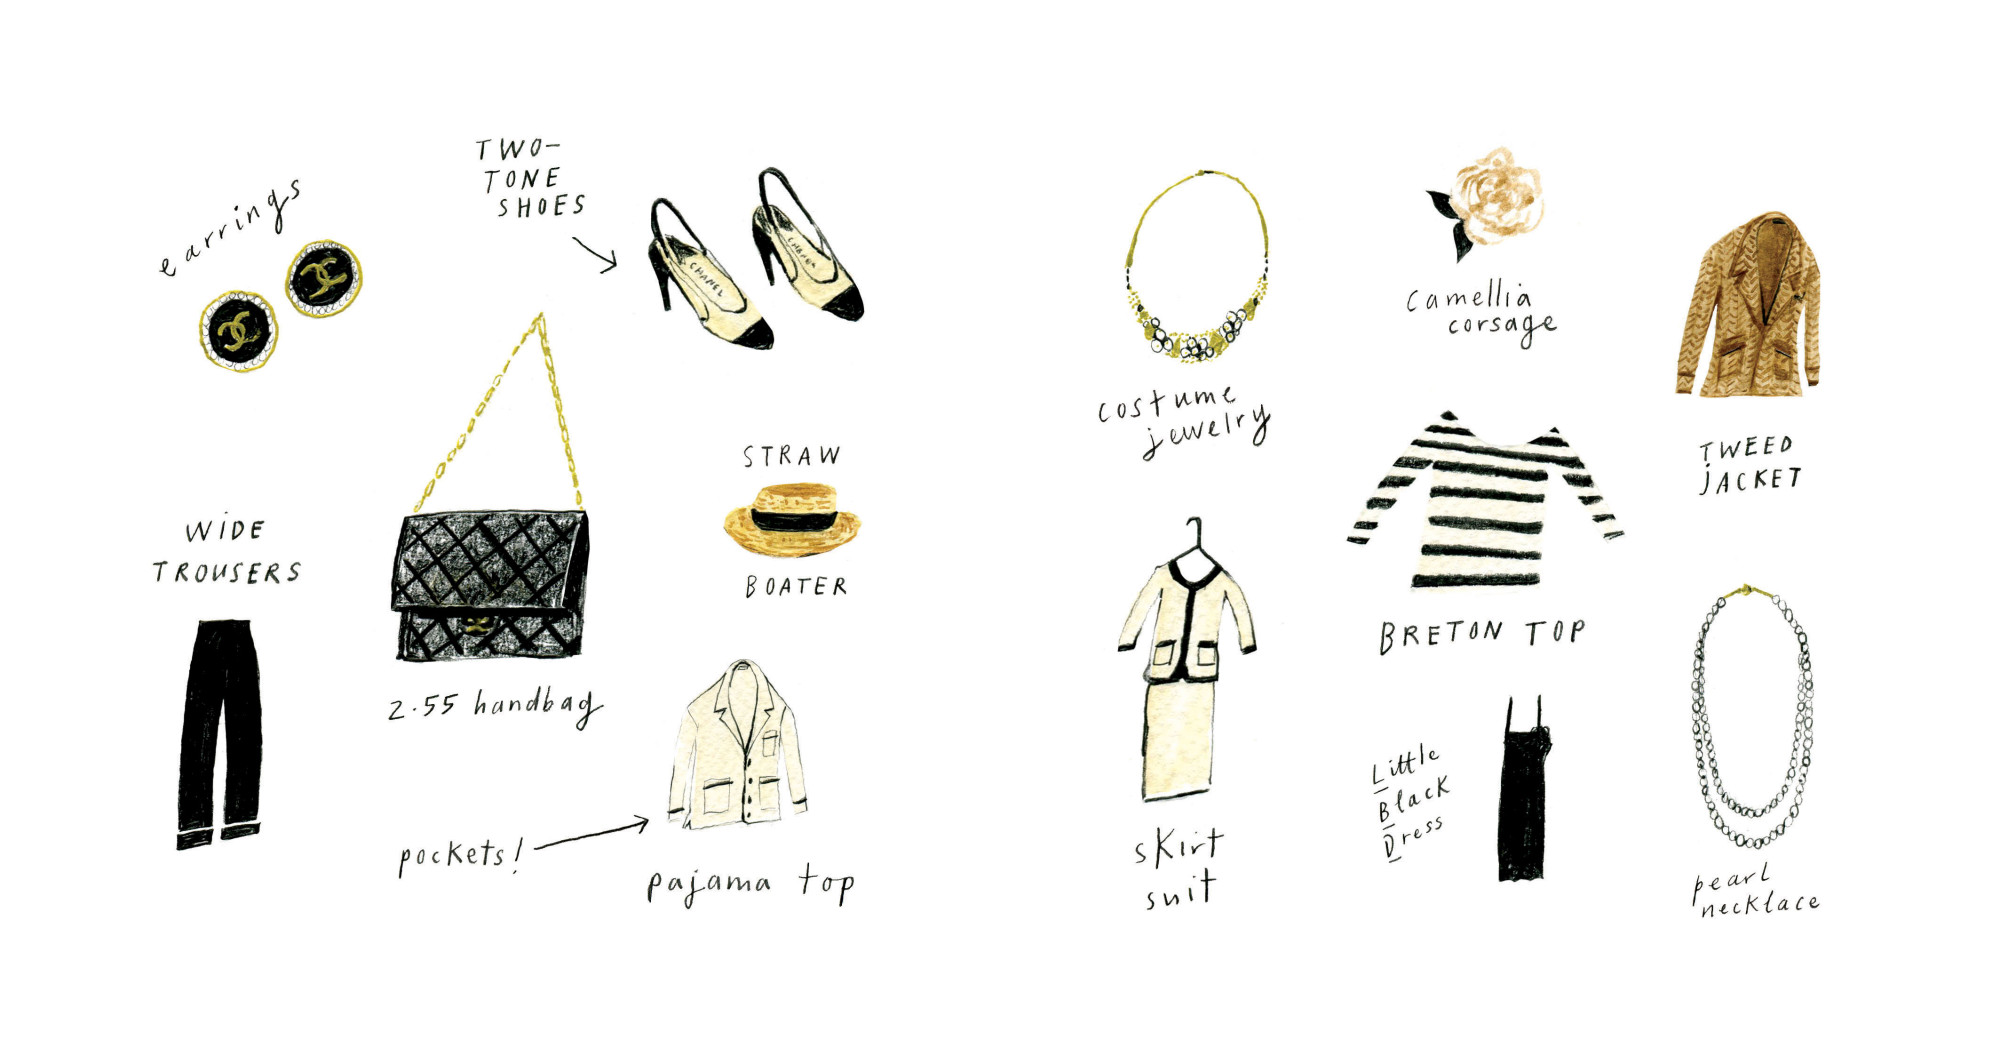 Coco Chanel Illustrated Biography 2